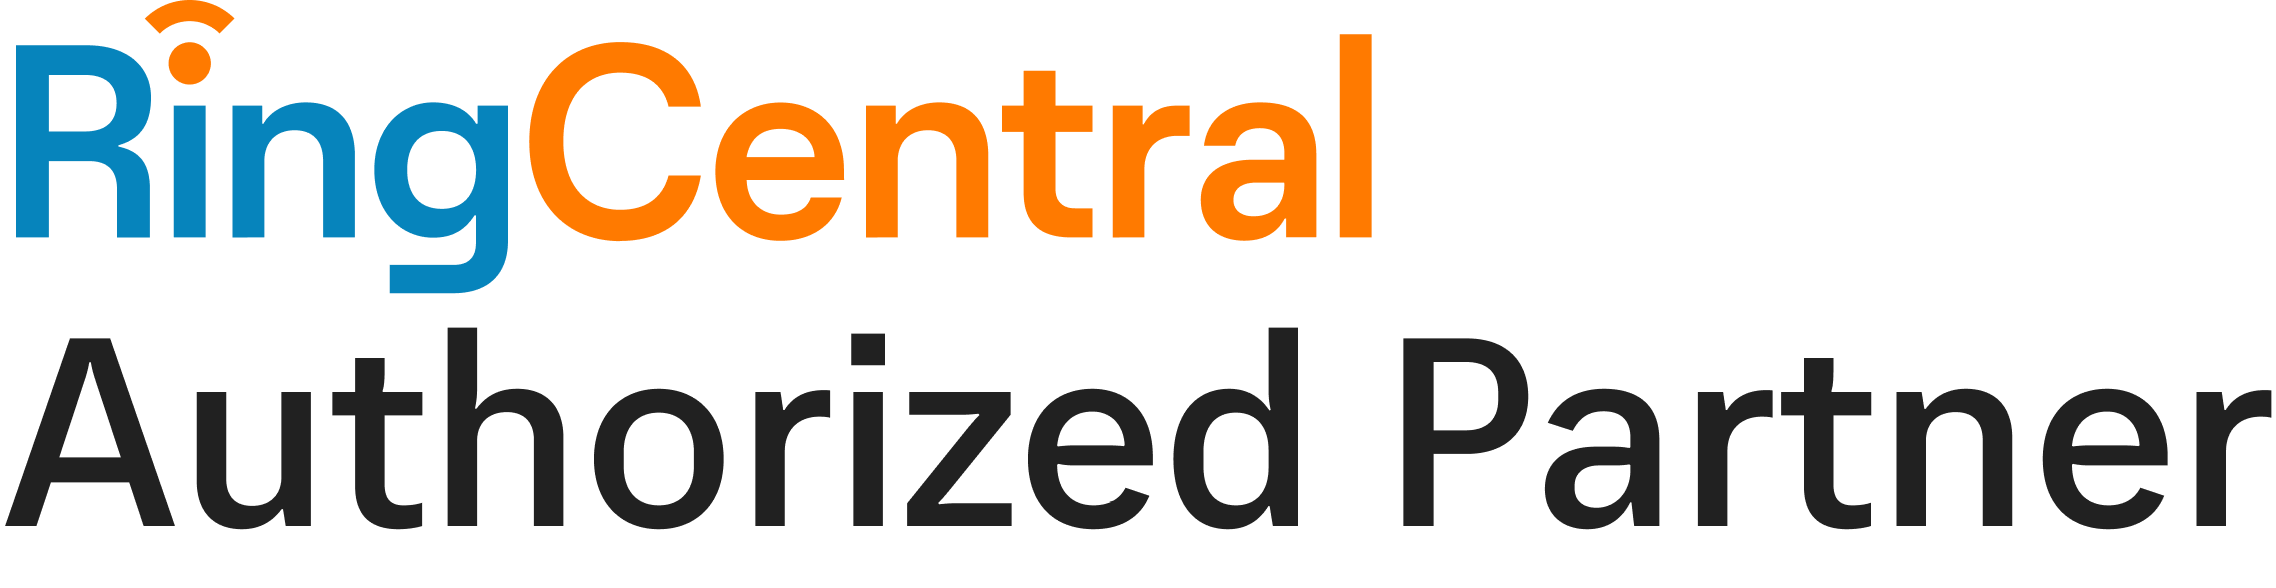 Copy of RingCentral Authorized Partner.png